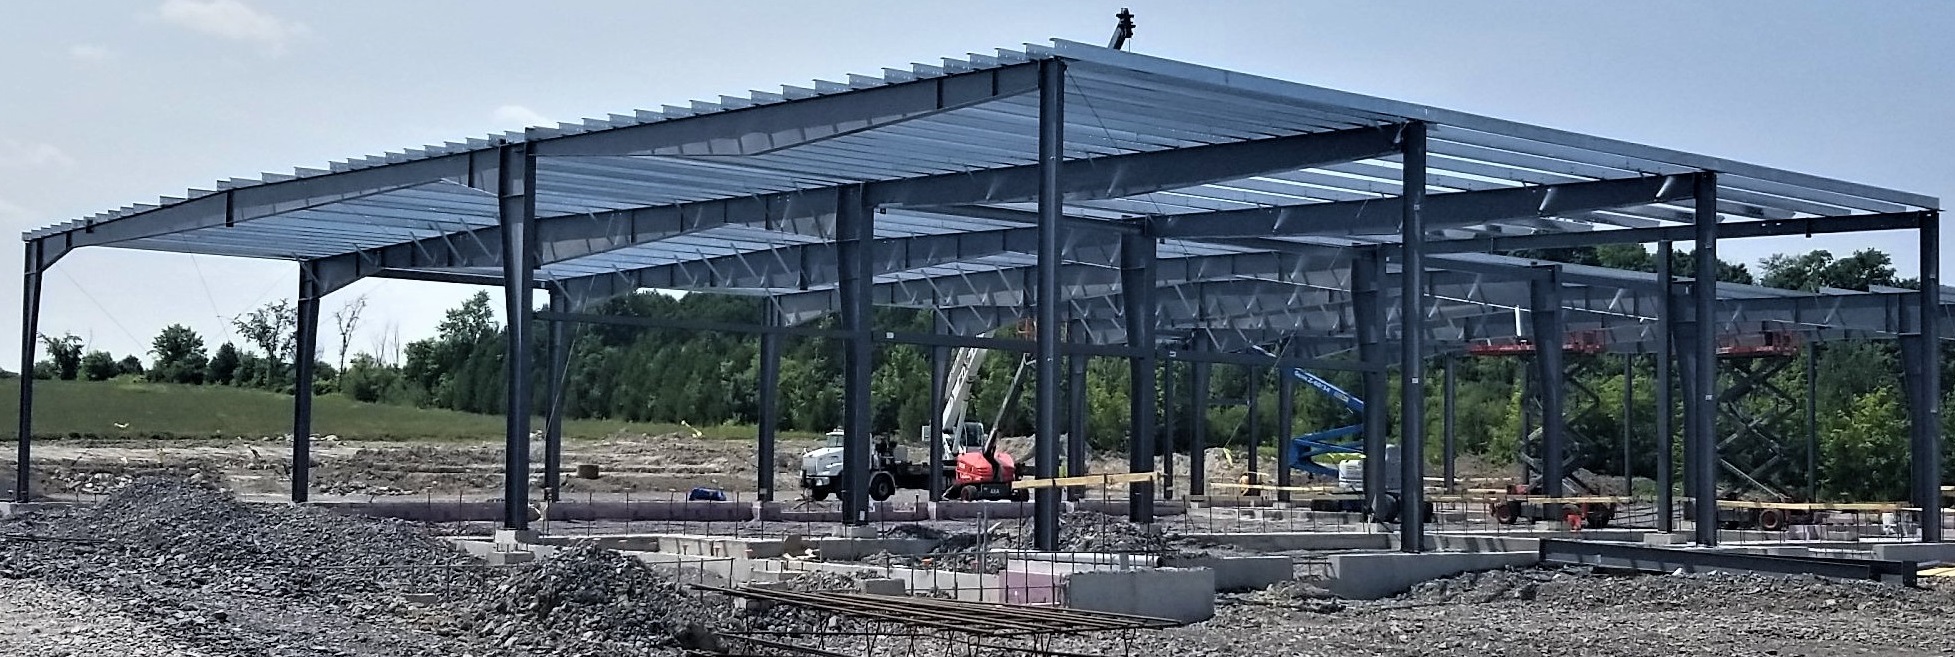 Barrhaven Ford Steel is Standing